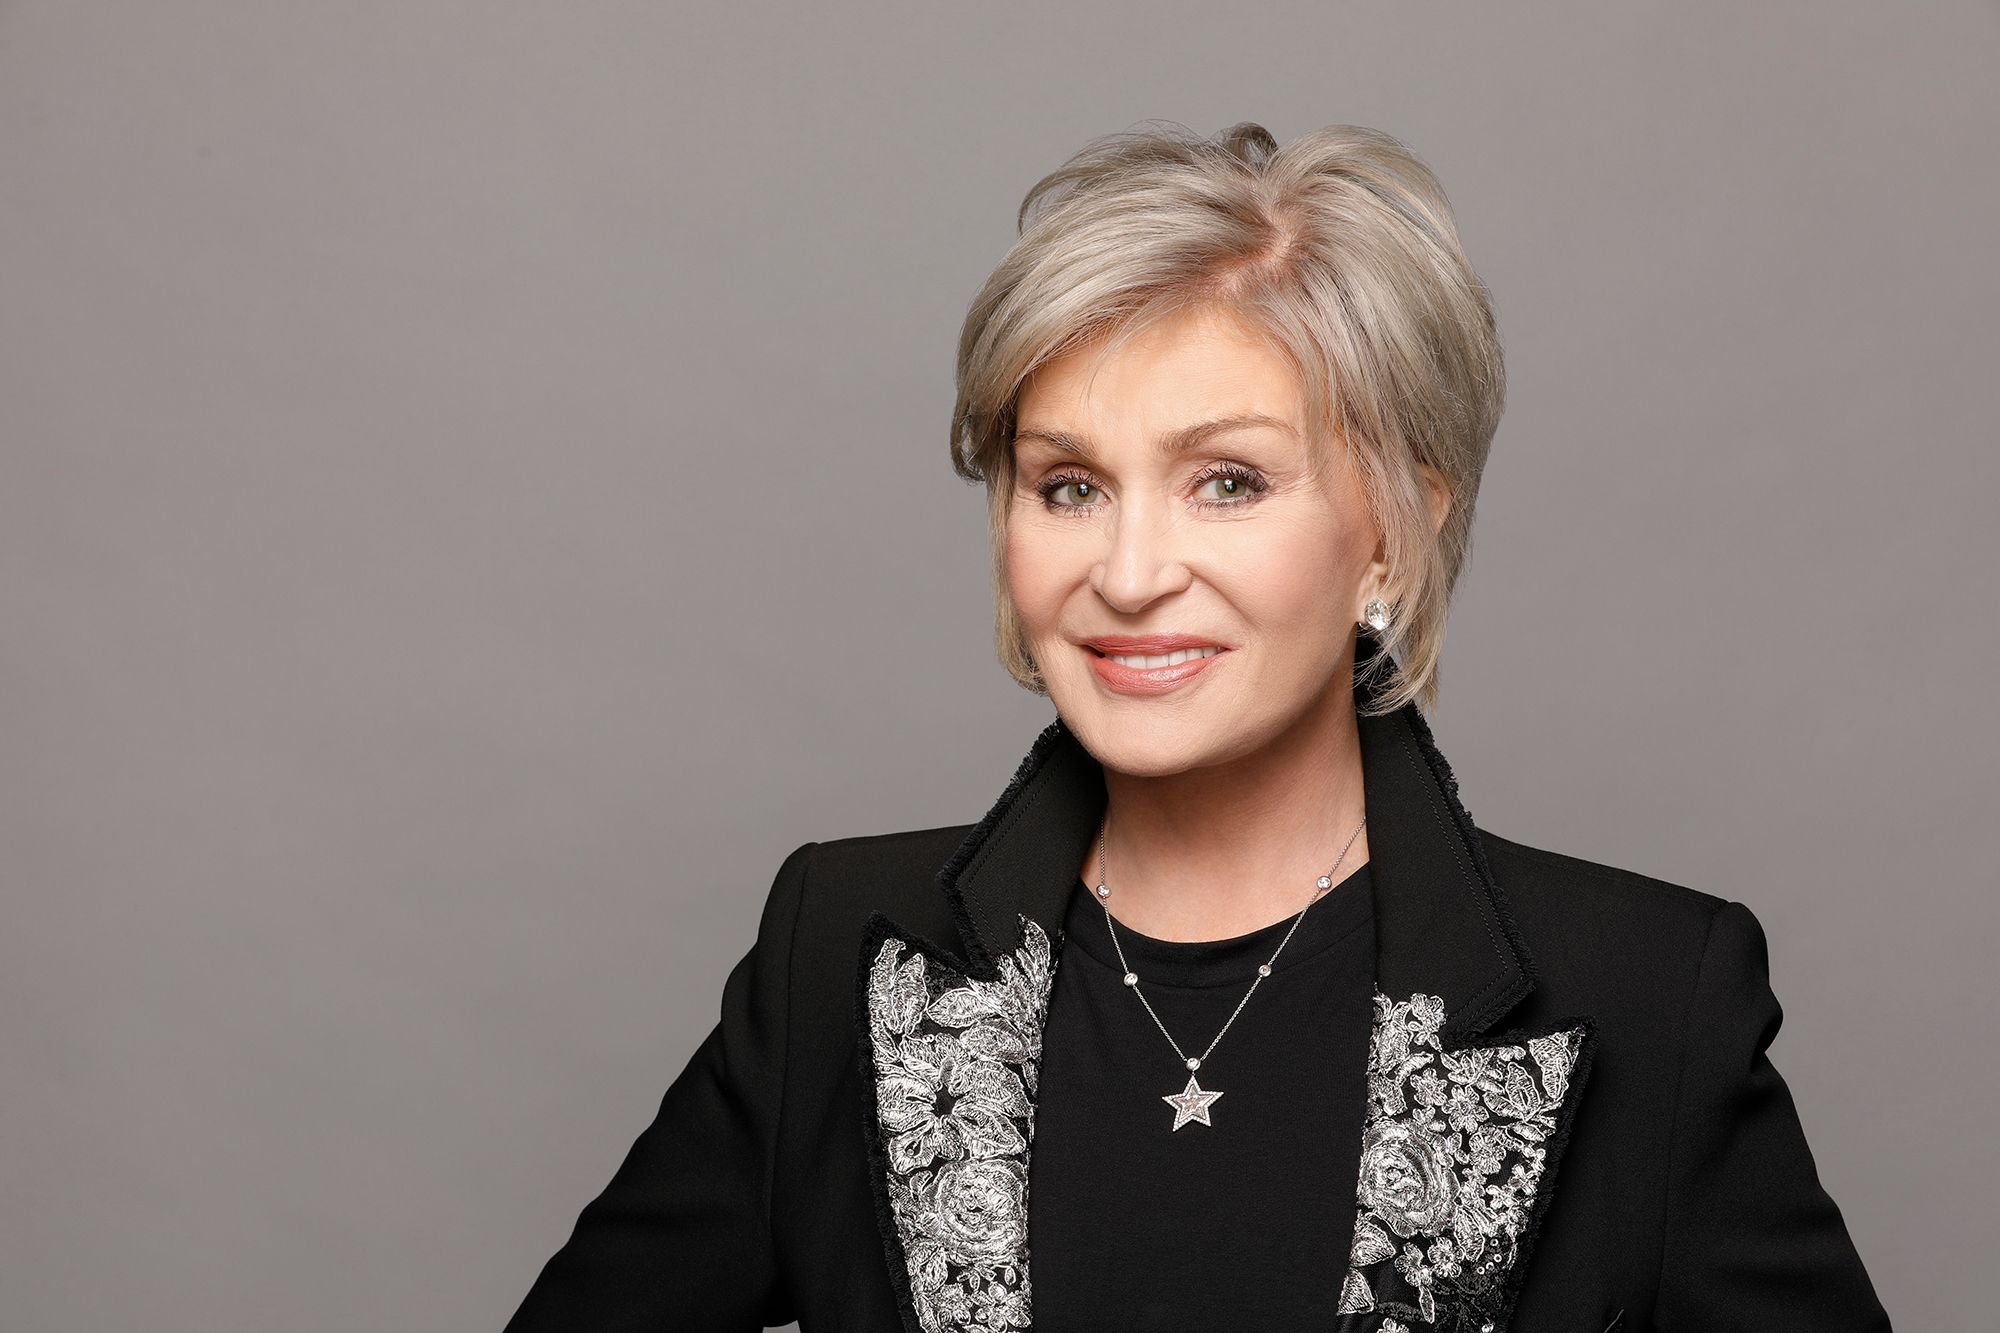 Sharon Osbourne in a promotional photo taken for CBS' "The Talk" in July 2020 | Source: Getty Images